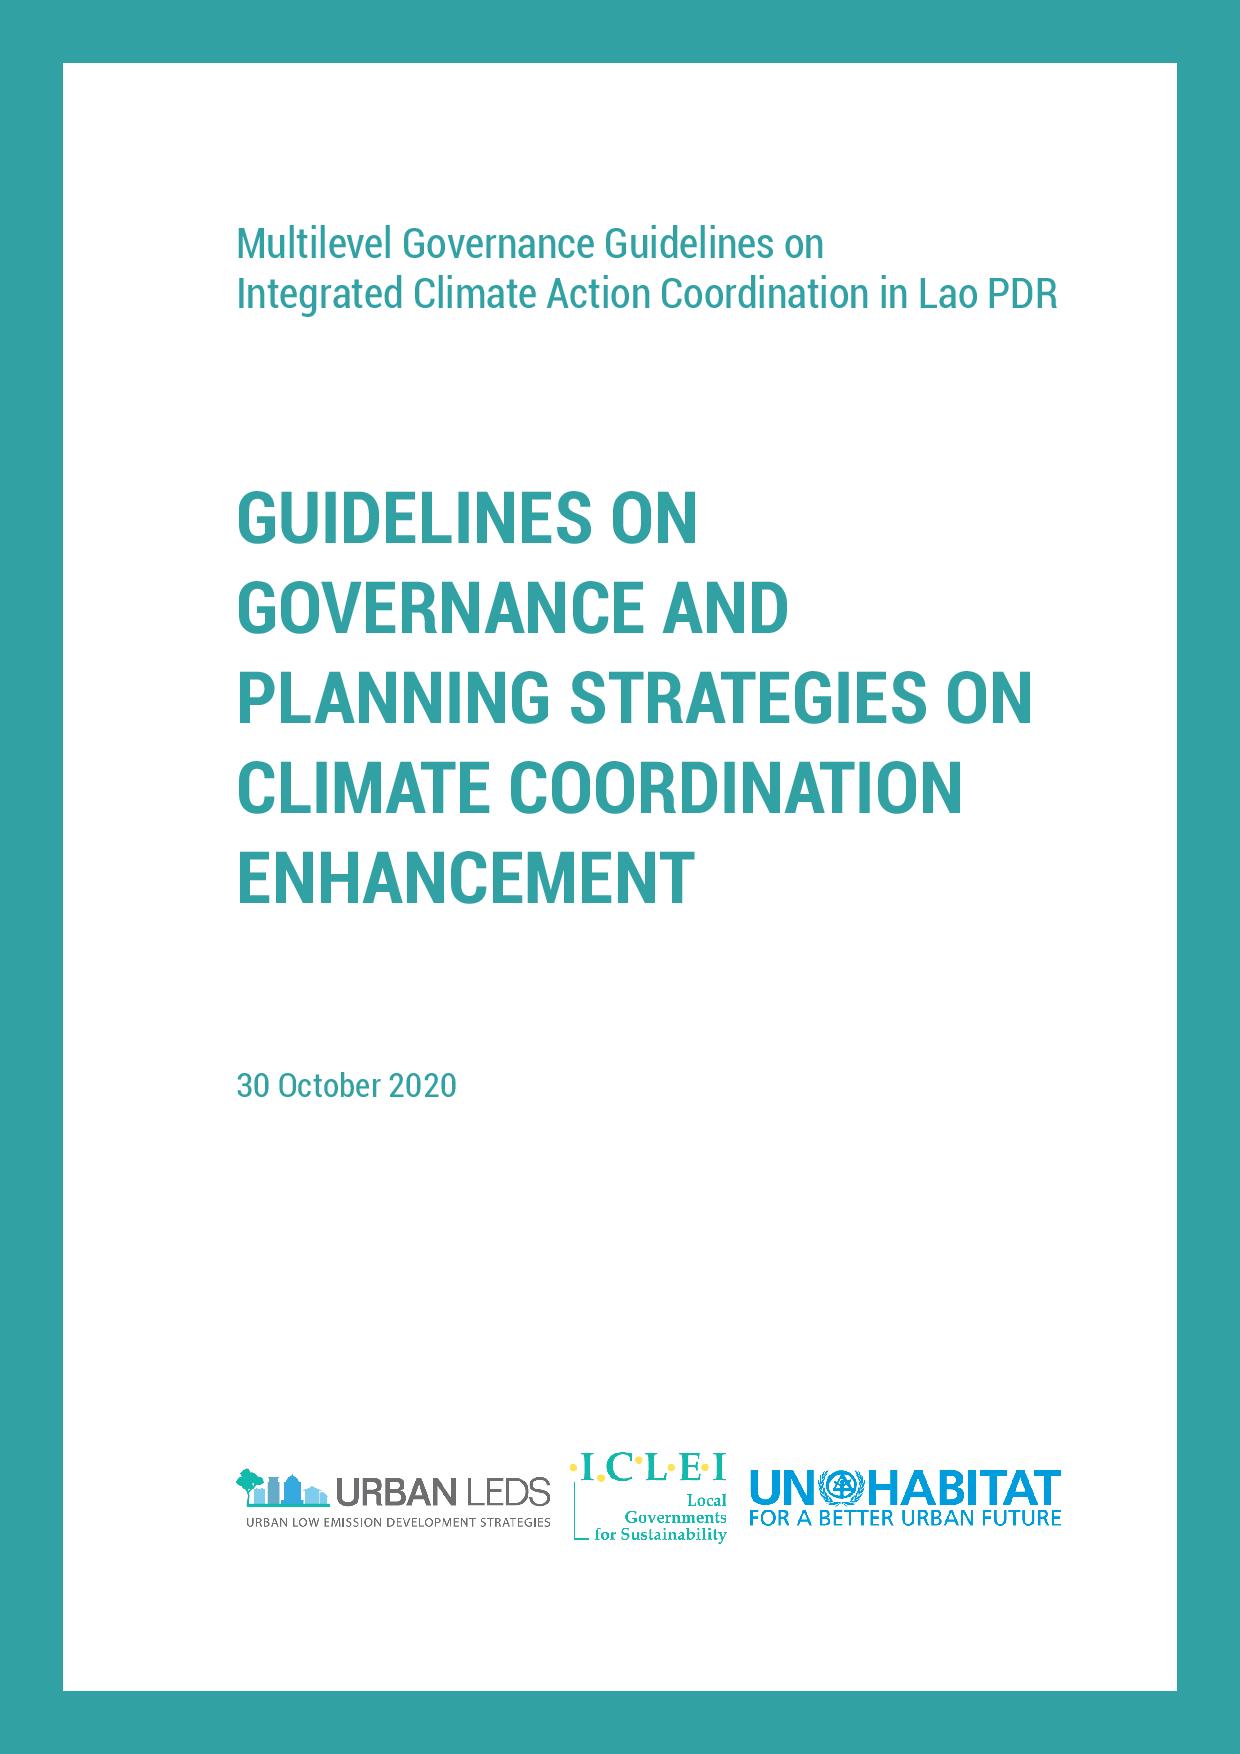 Lao PDR: Guidelines on Governance and Planning Strategies on Climate Coordination Enhancement